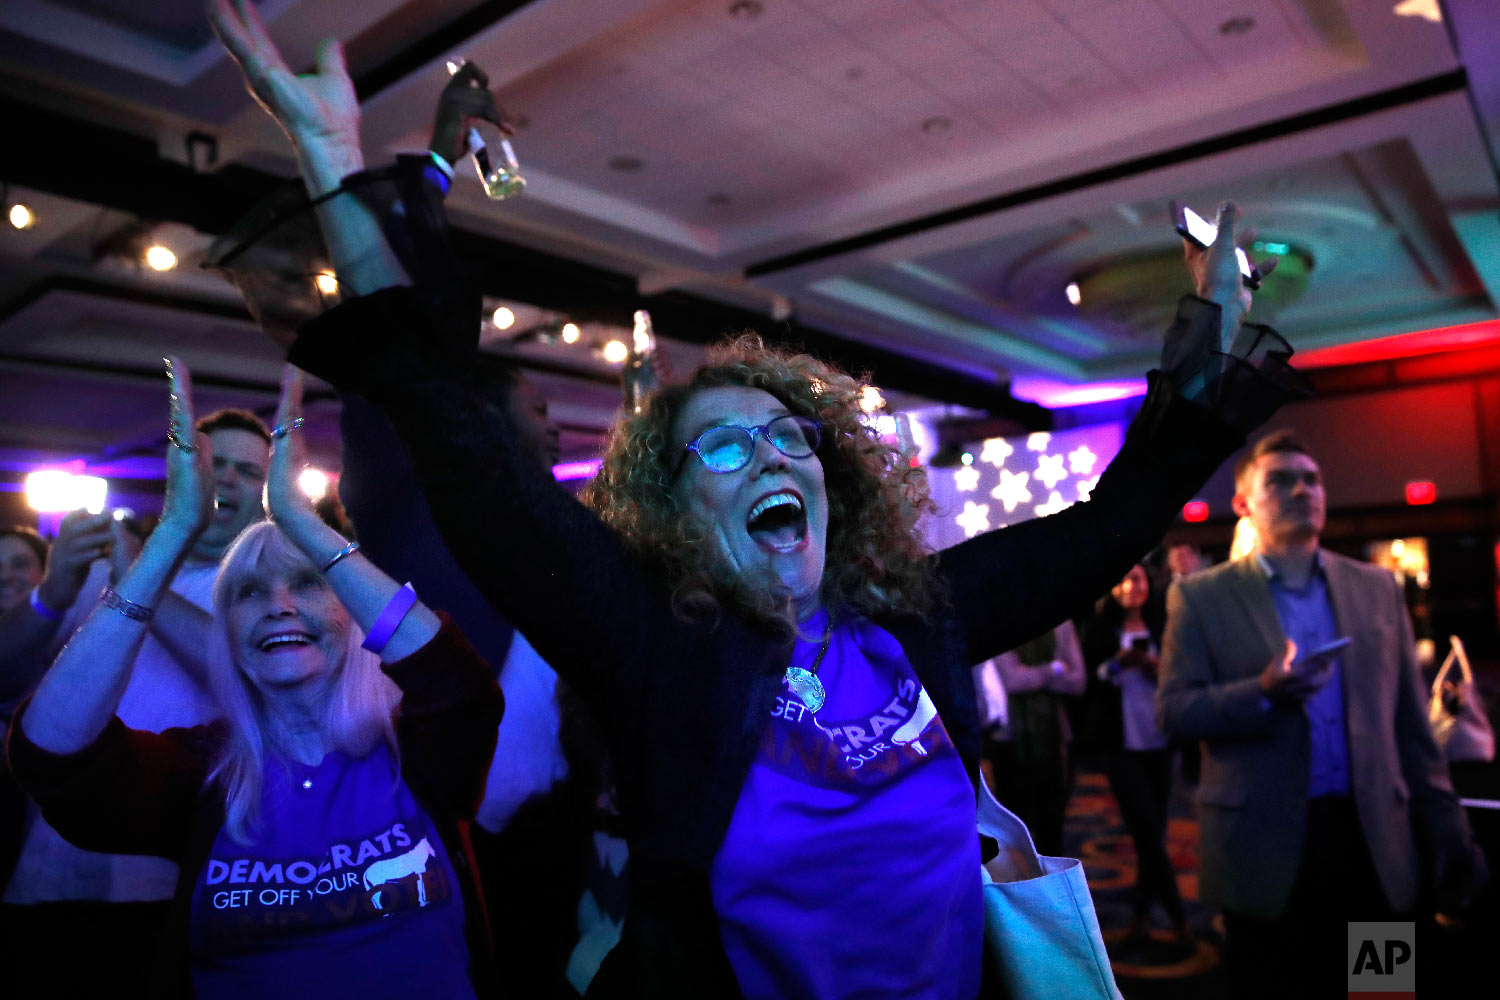  Sydney Crawford, 84, left, of New York, and JoAnn Loulan, 70, of Portola Valley, Calif., cheer as election returns come in during a Democratic party election night event at the Hyatt Regency Hotel in Washington on Tuesday, Nov. 6, 2018. (AP Photo/Ja